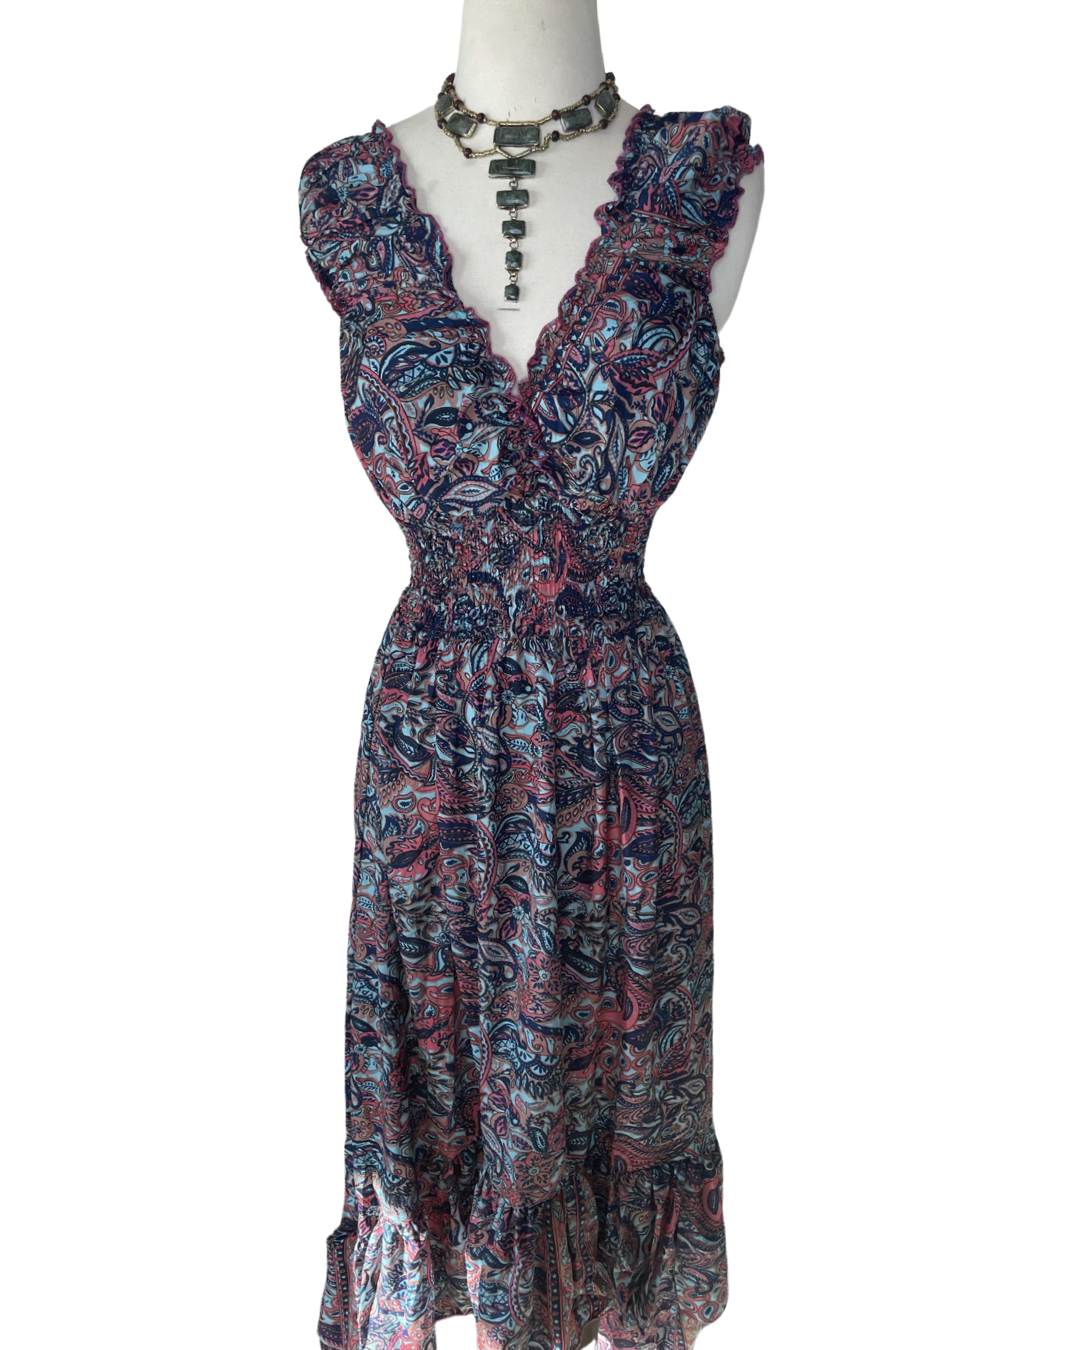 Bohemian High and Low Silk Ruffle Dress  (Sky blue/Navy/Pink) - Coco and lulu boutique 